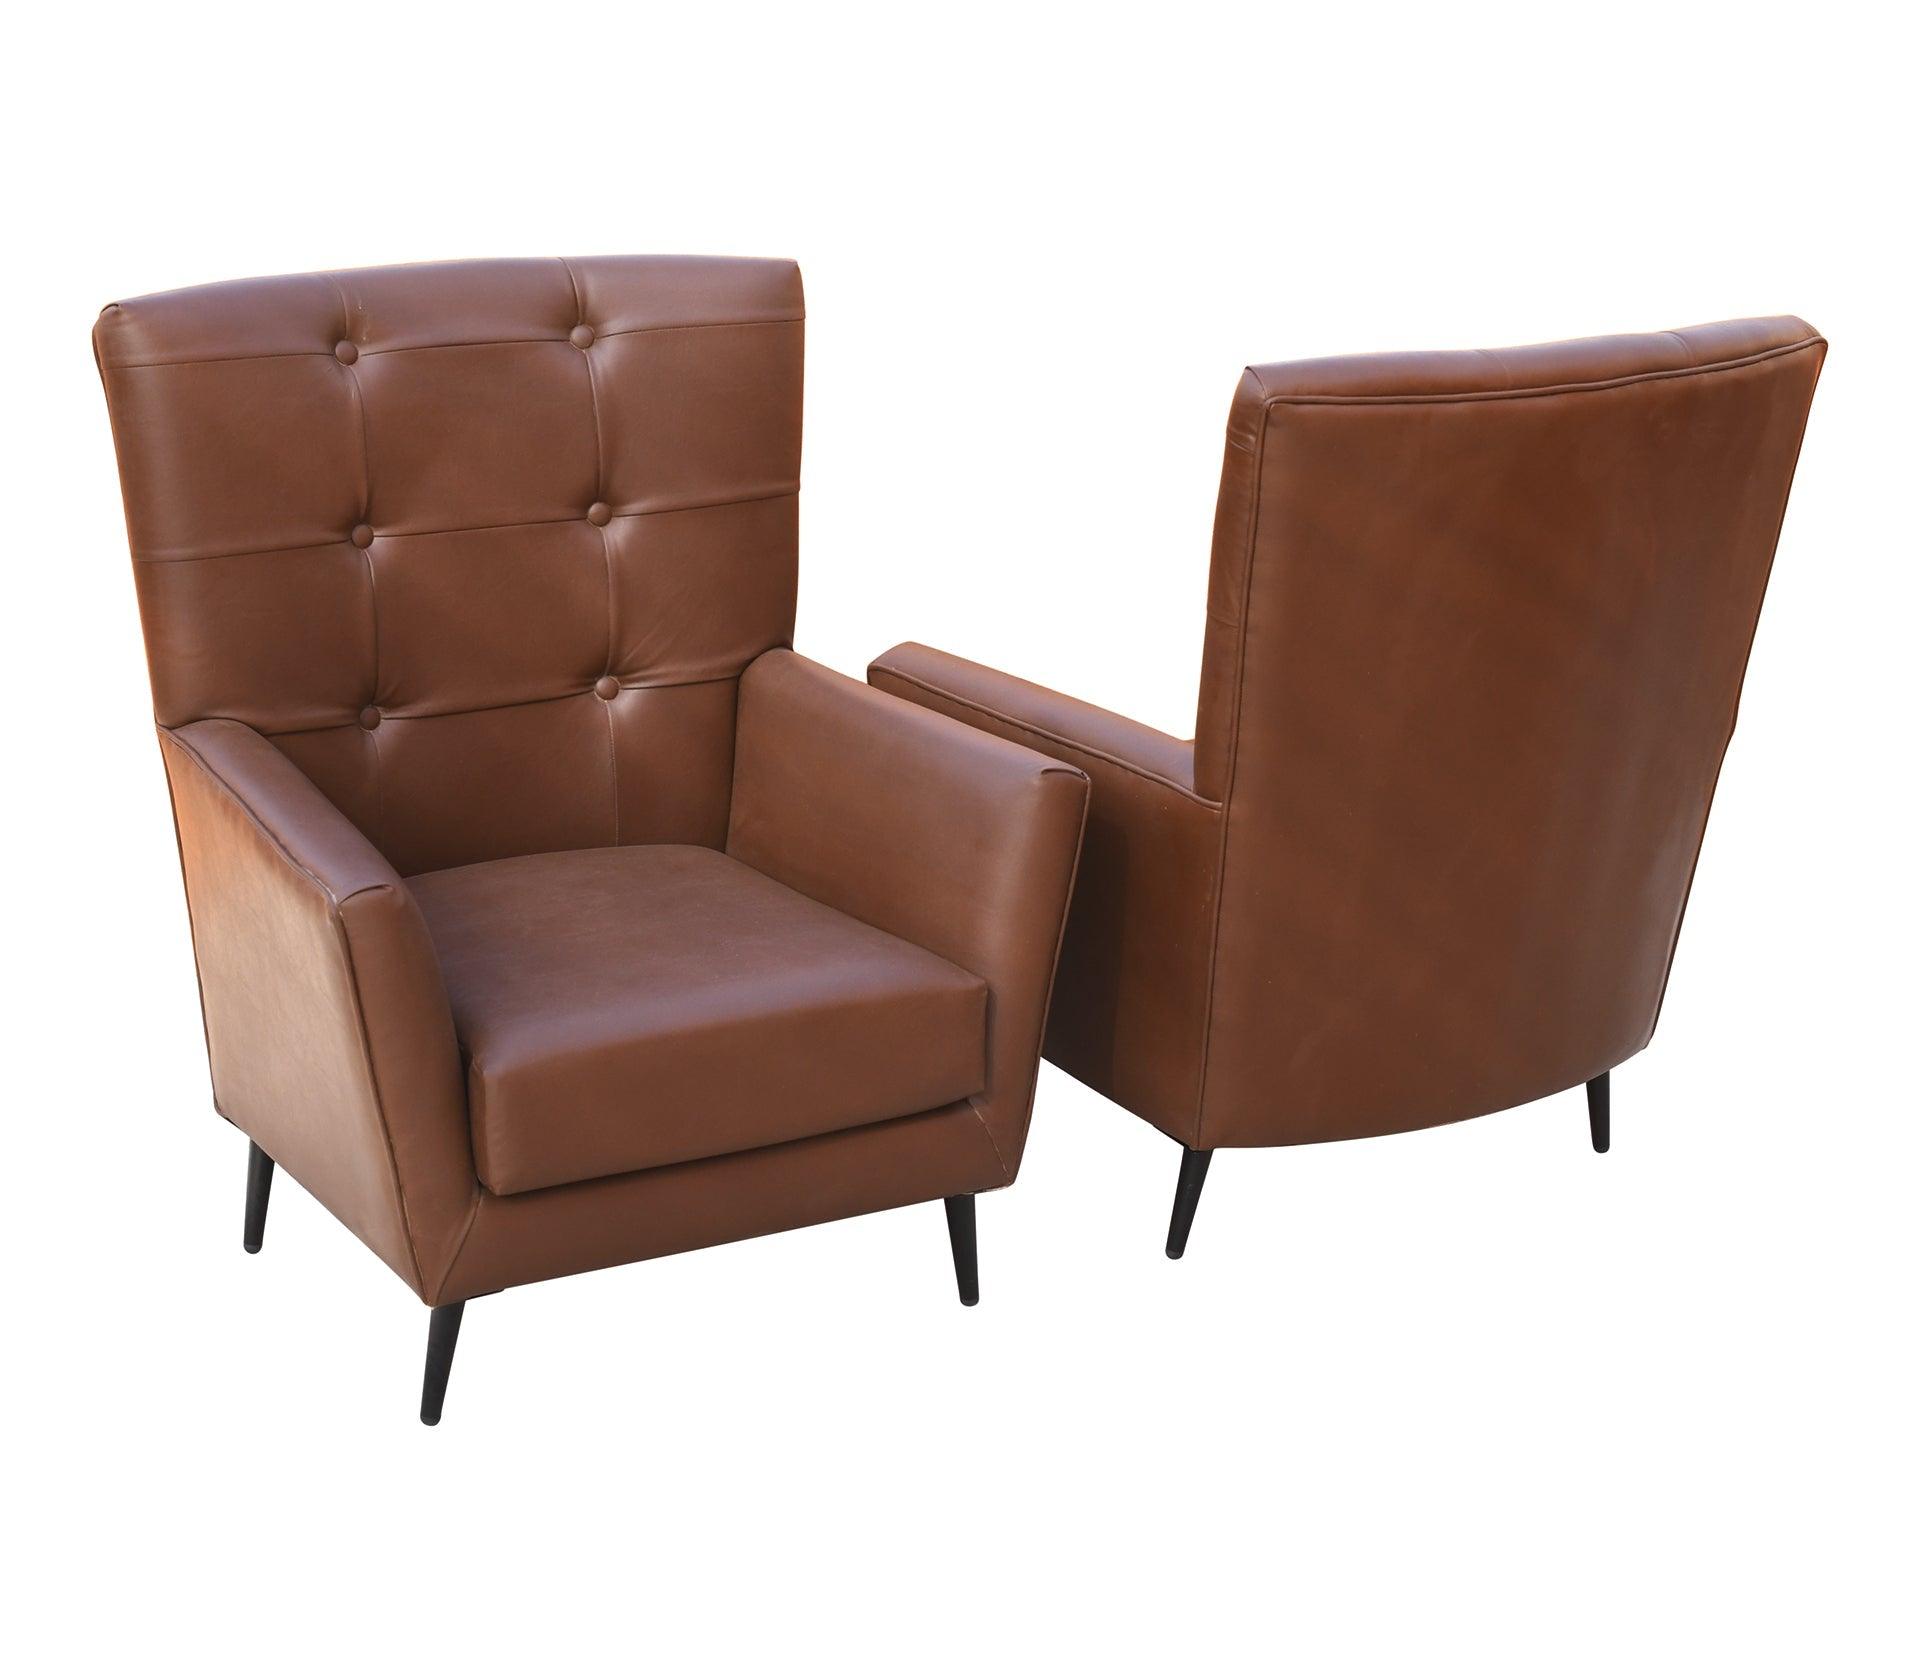 Aristocrate Dark Brown Leather Chair Set of 2 - Furniture Castle